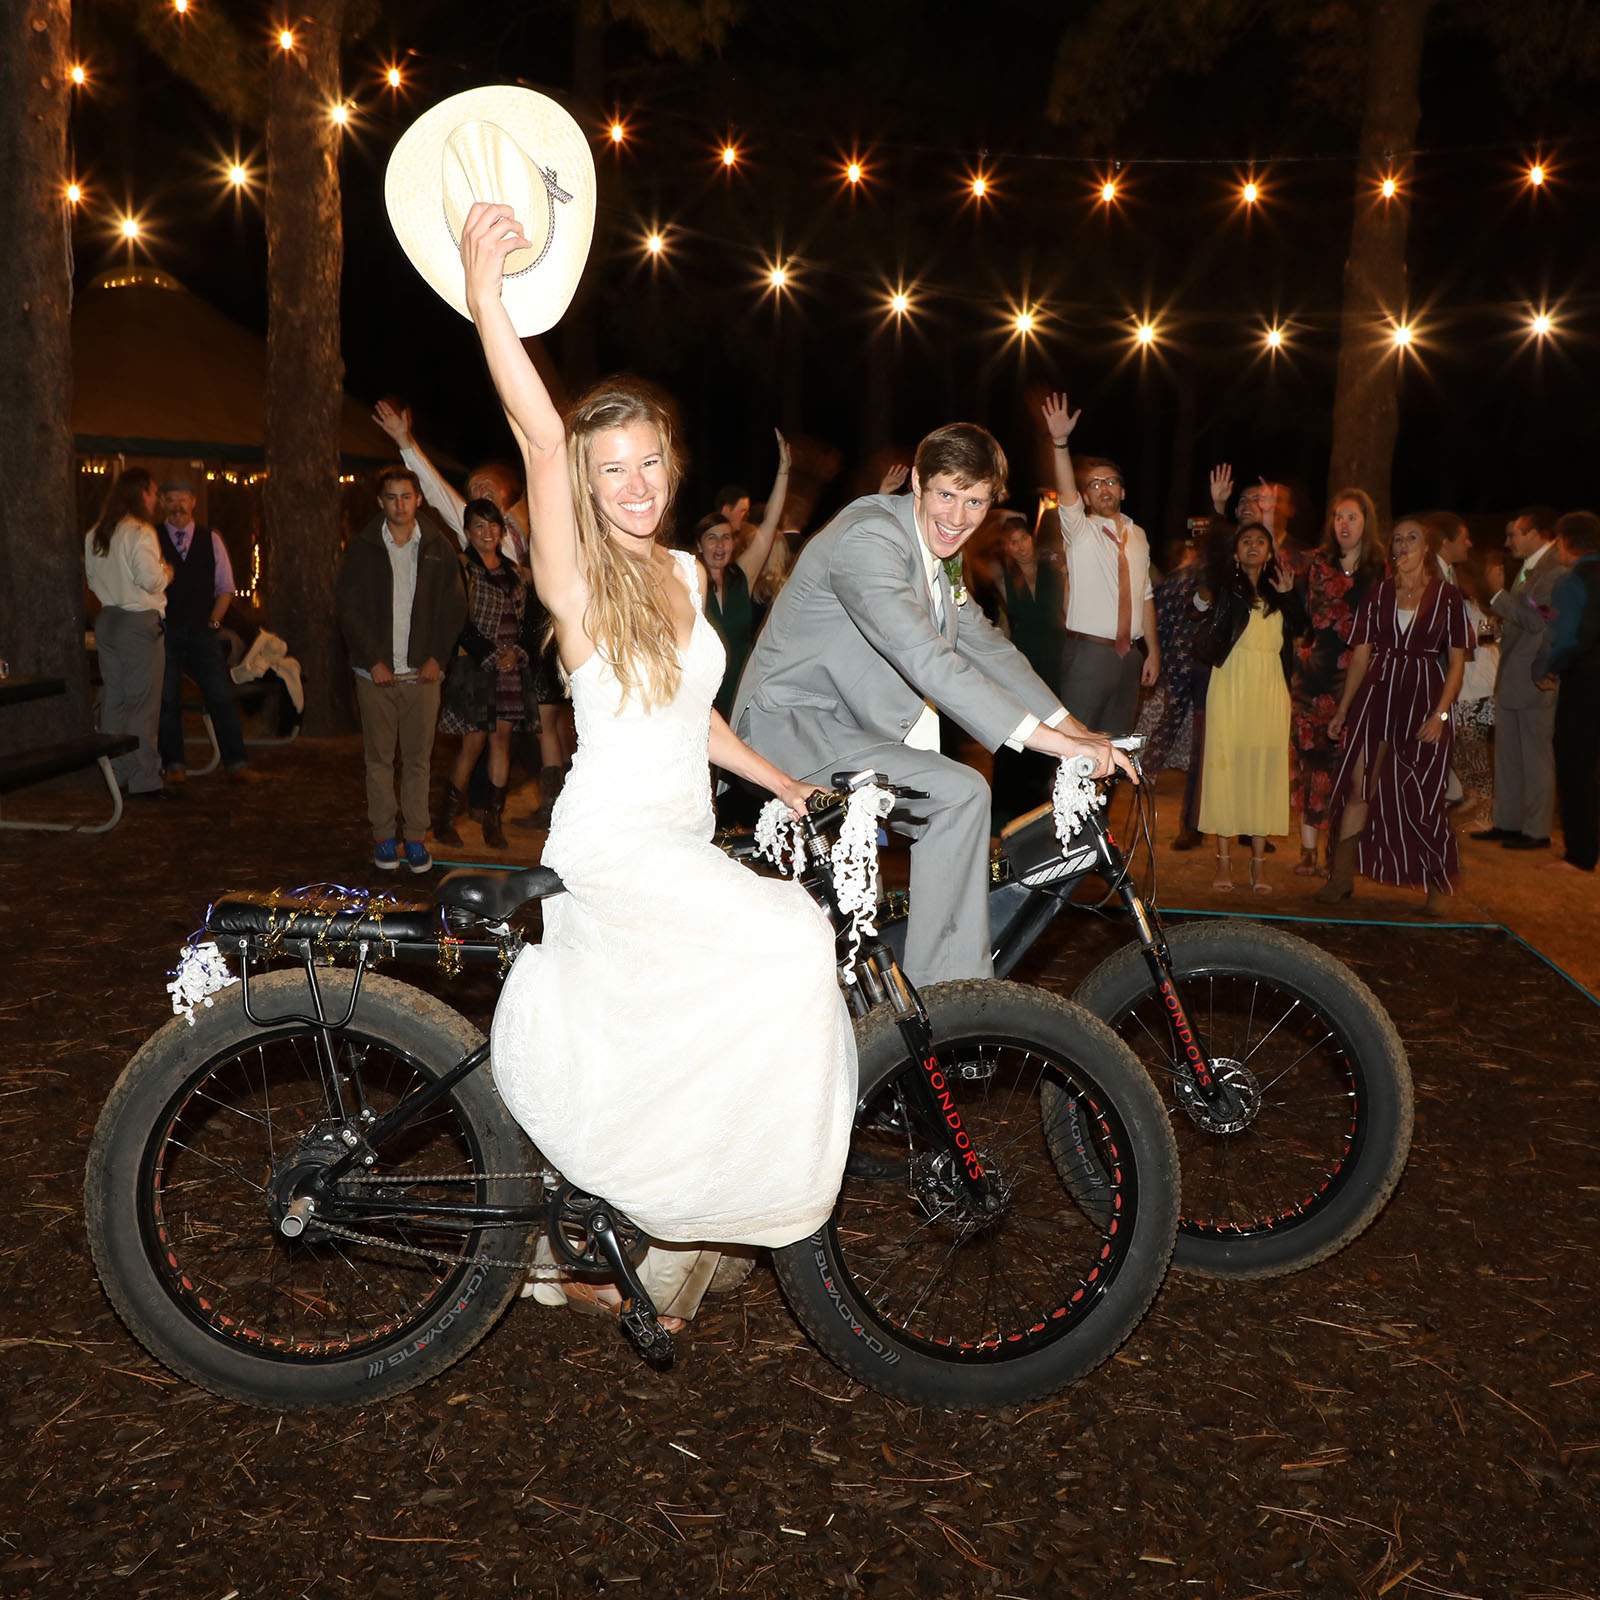 A bride and groom prepare to ride electric mountain bikes to their honeymoon yurt at the Flagstaff Nordic Center